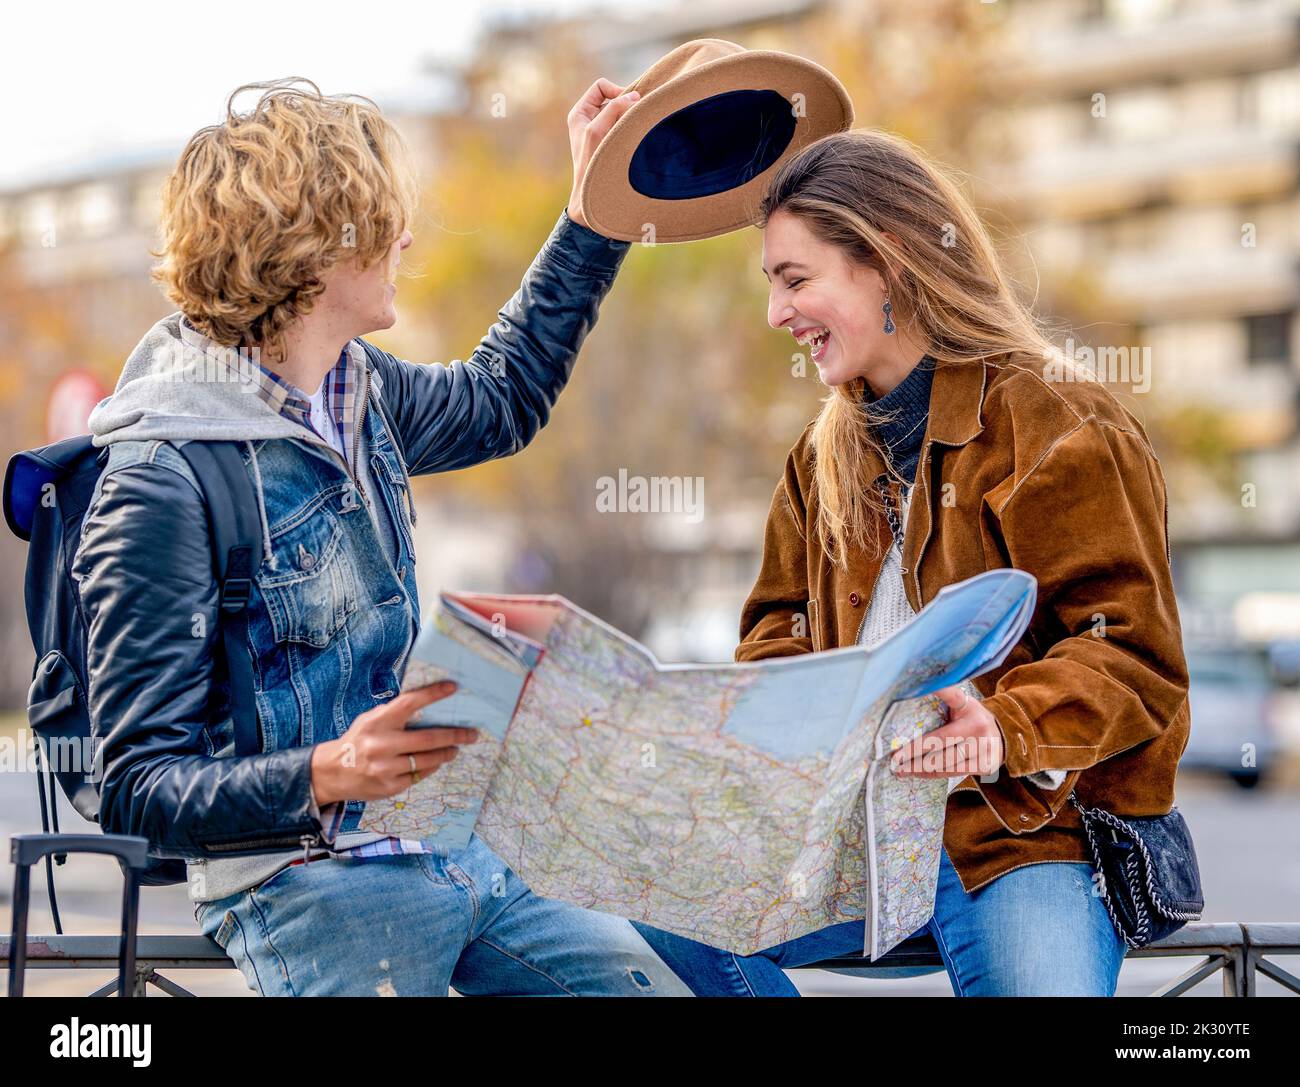 Young man holding hat and map sitting on railing with woman Stock Photo